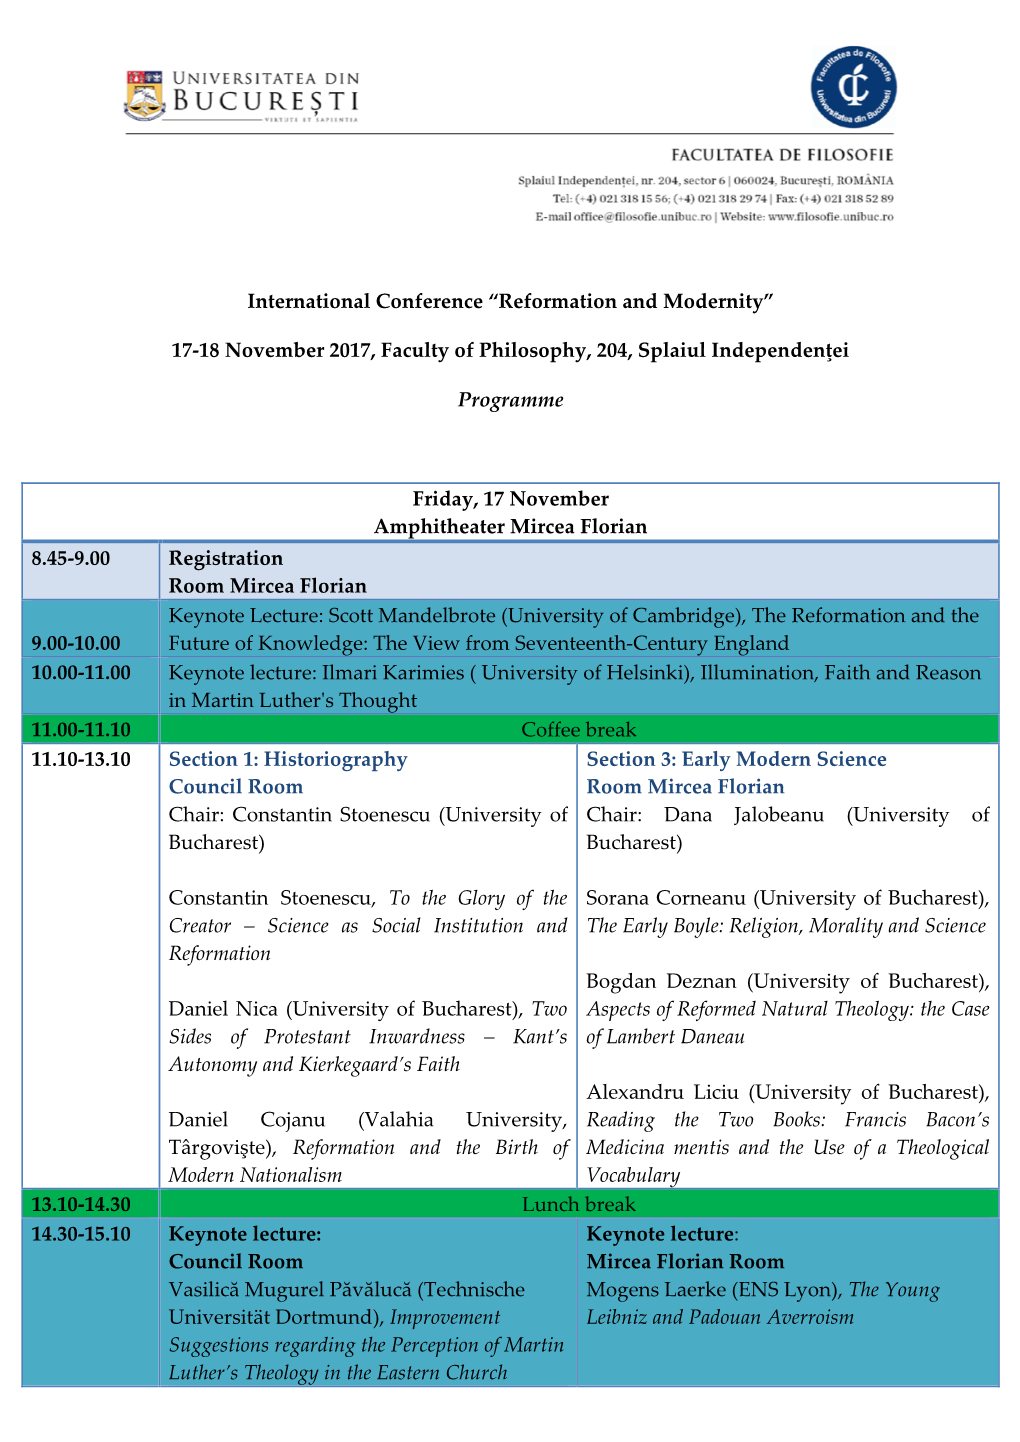 International Conference “Reformation and Modernity” 17-18